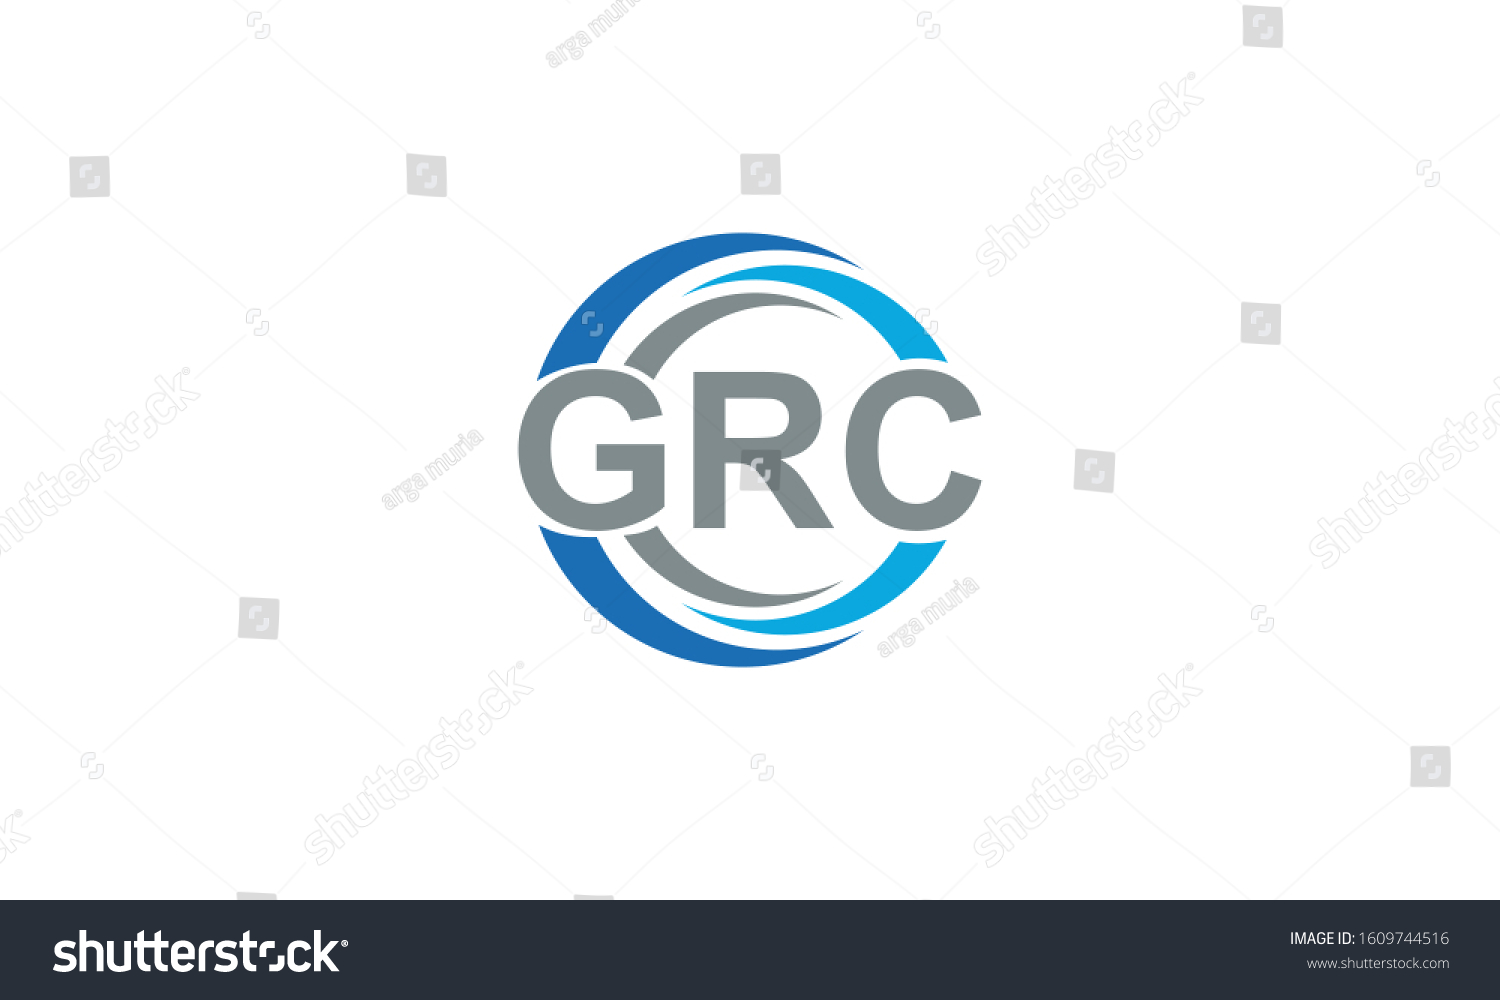 SVG of creative simple geometric GRC initial logo template with blue and grey color for any business, company, accounting financial or digital cryptocurrency, blockchain, Vector illustration eps 10 svg